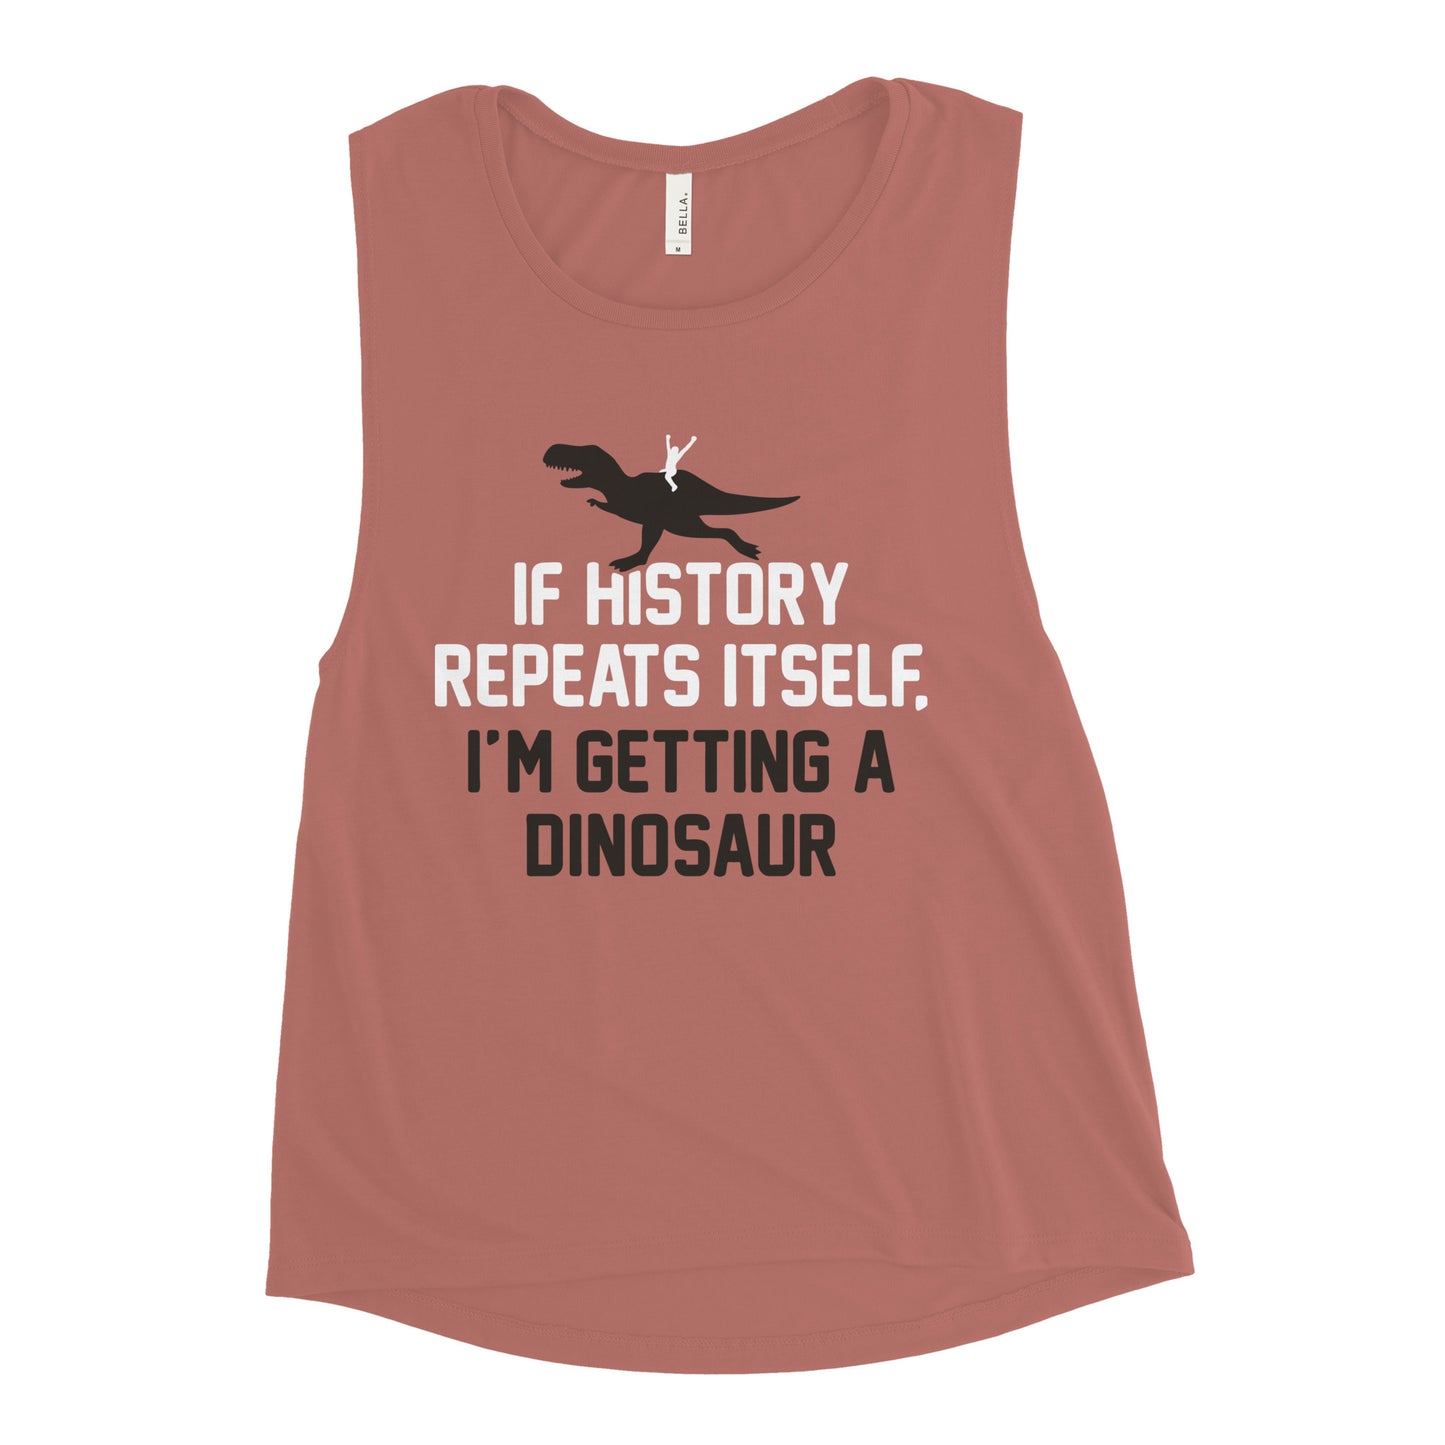 If History Repeats Itself, I'm Getting A Dinosaur Women's Muscle Tank